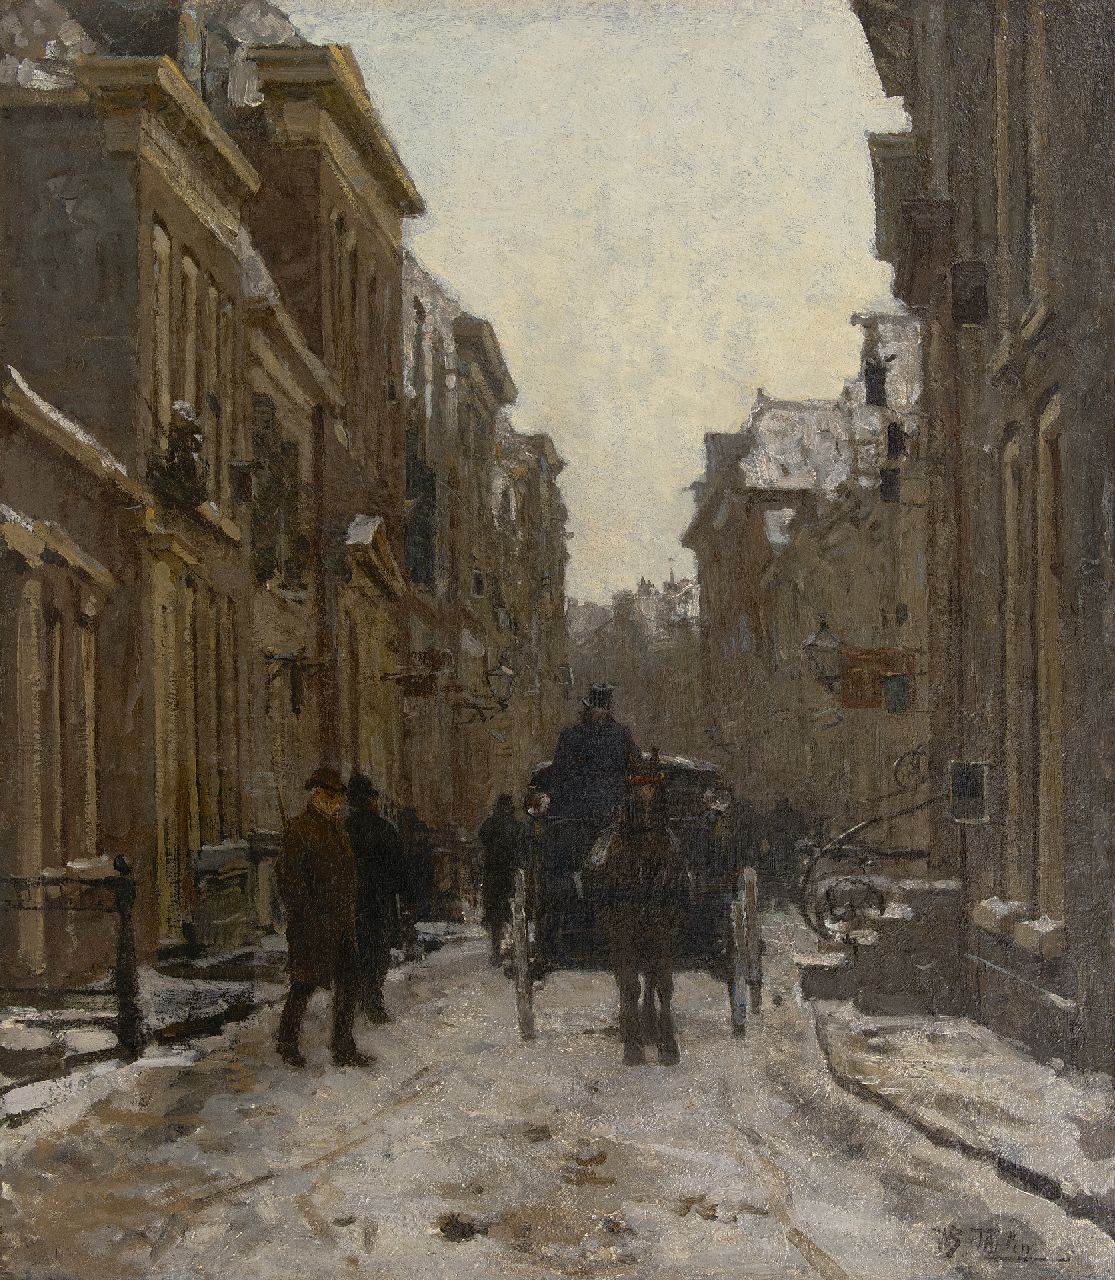 Tholen W.B.  | Willem Bastiaan Tholen | Paintings offered for sale | Carriage in a snowy street in Voorburg, oil on canvas laid down on panel 64.1 x 56.3 cm, signed l.r. and executed ca. 1889